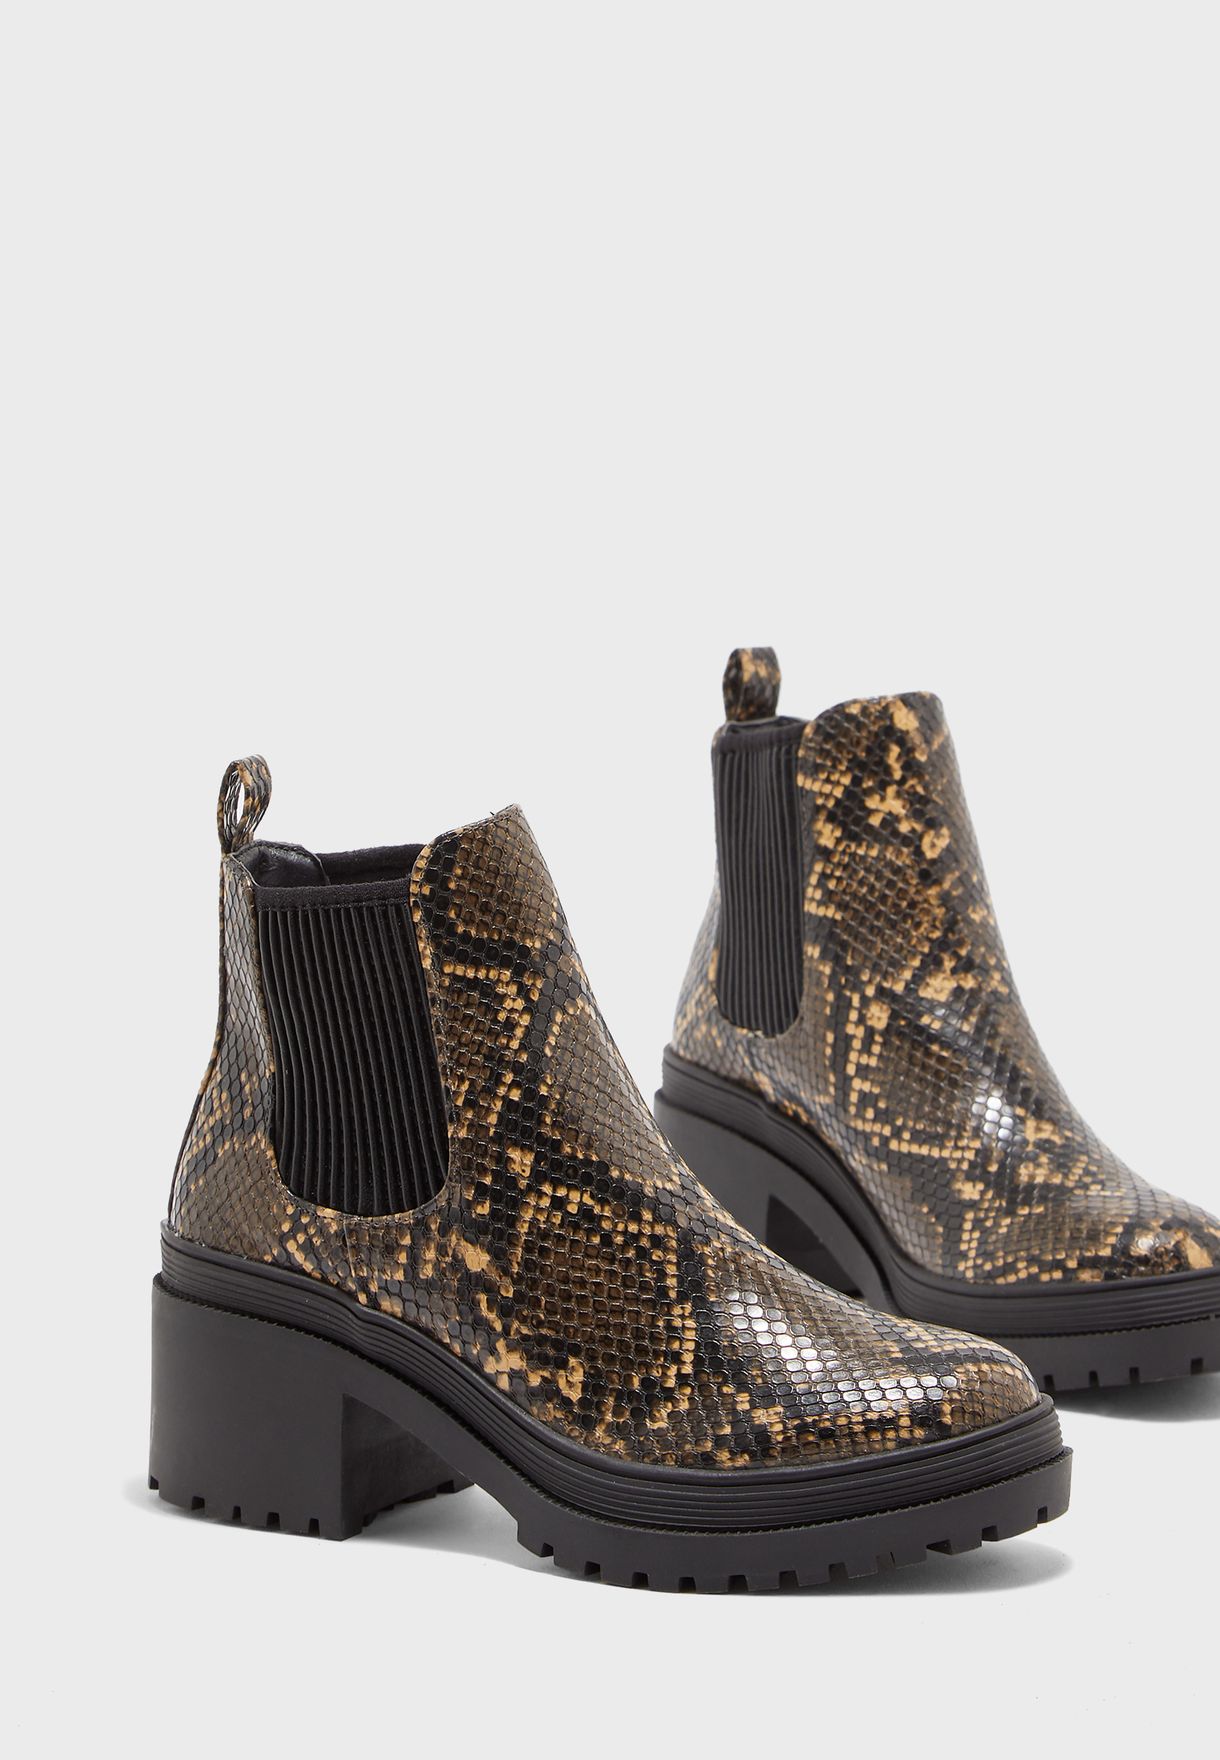 topshop snakeskin ankle boots